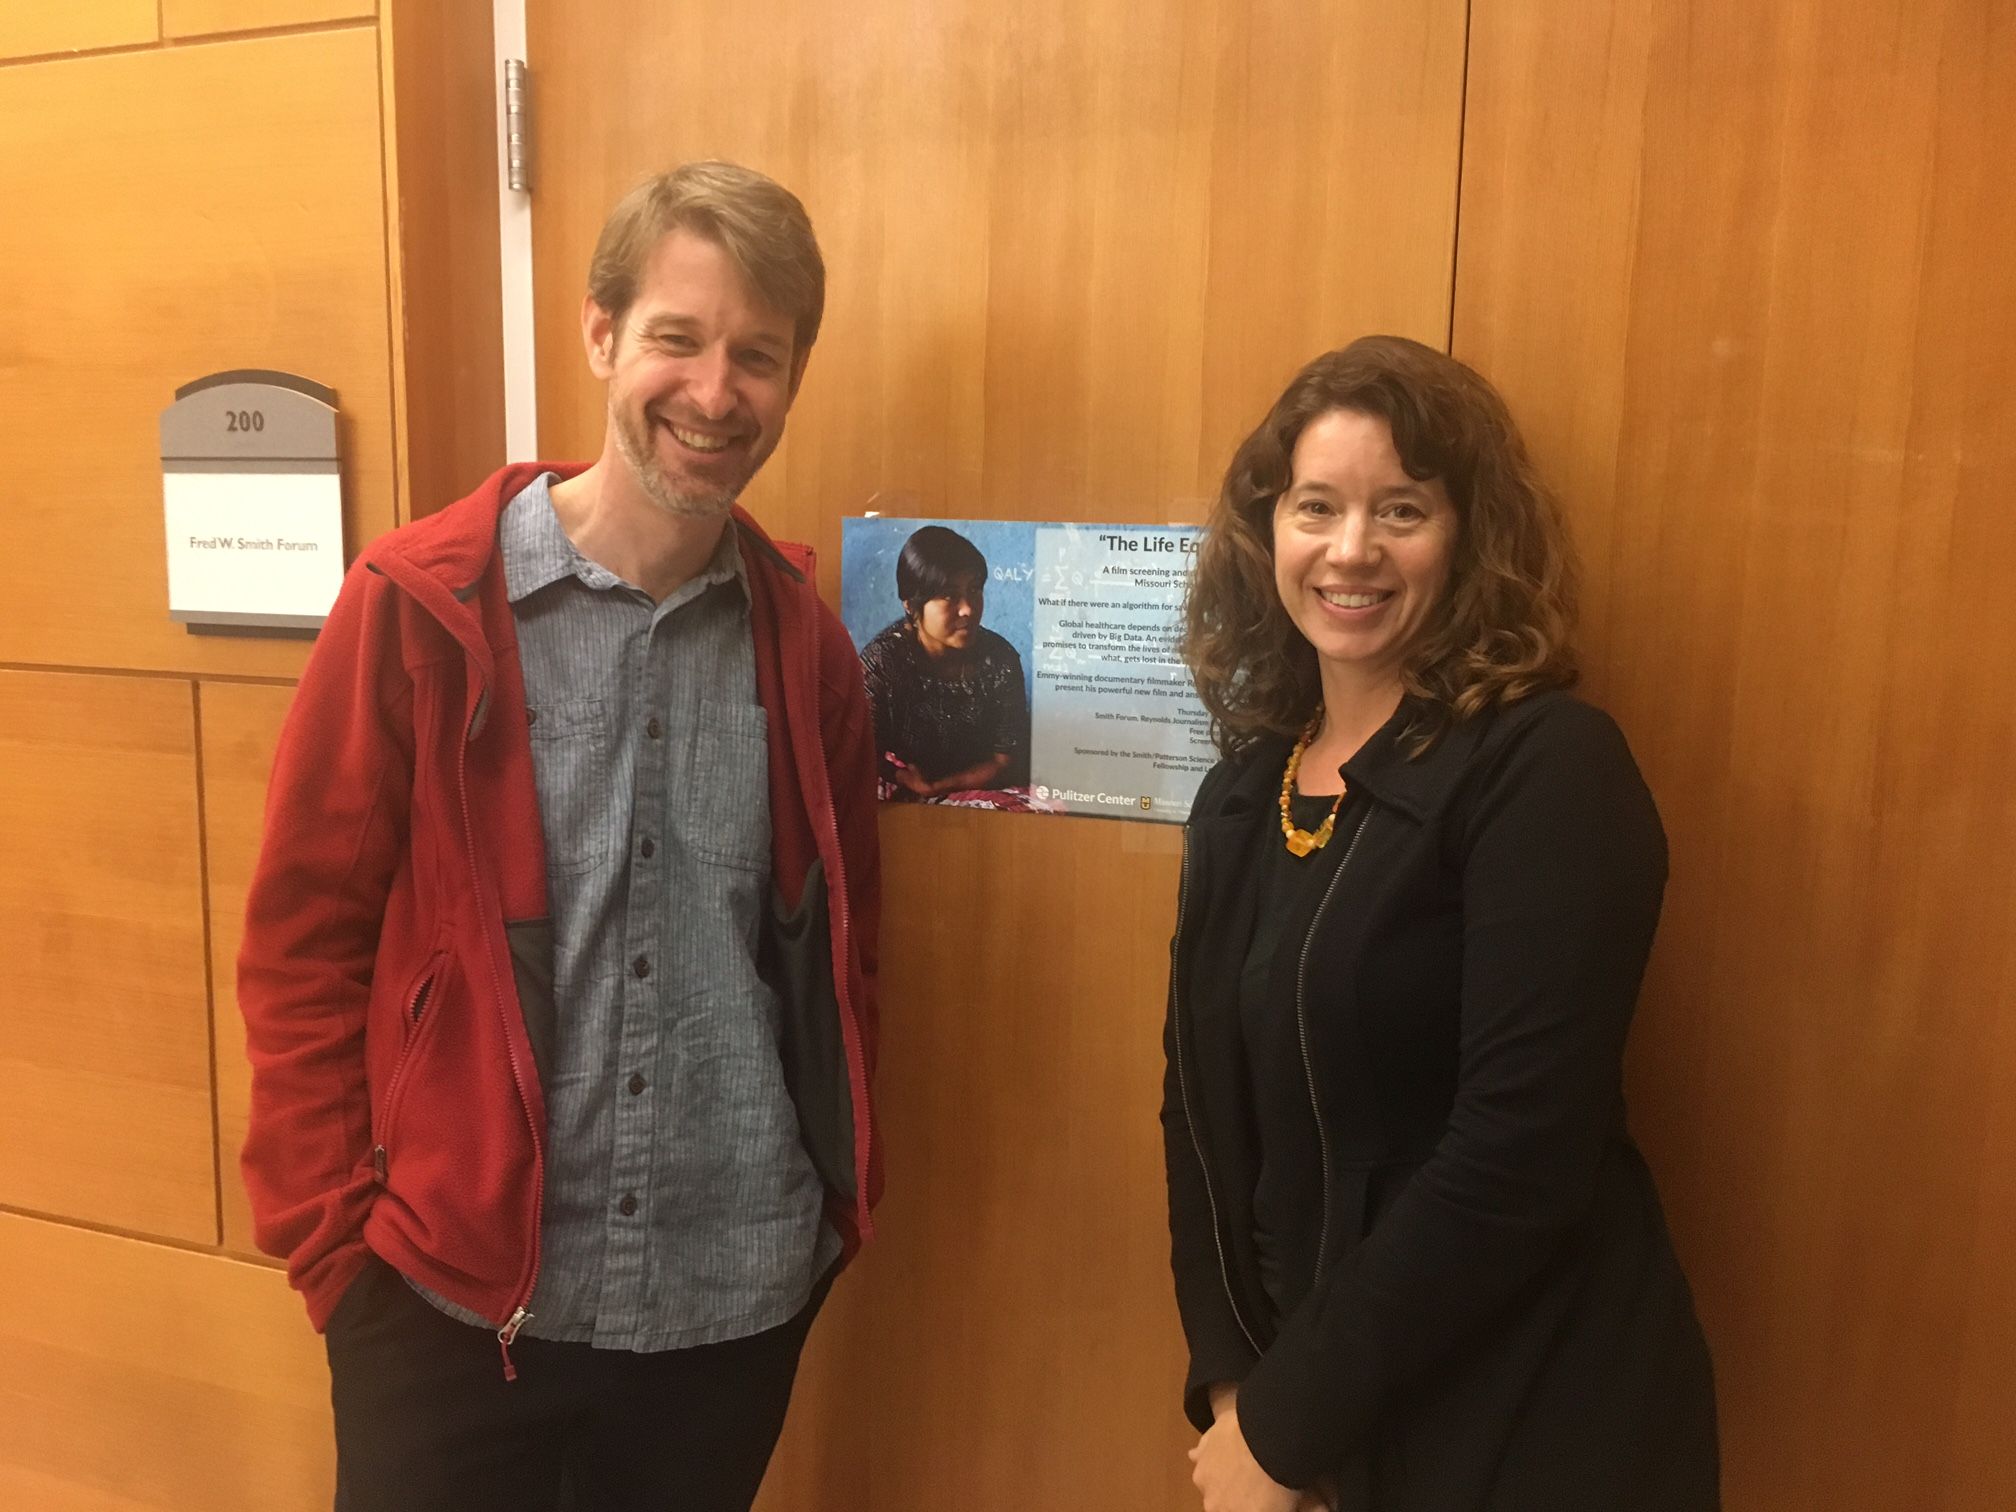 Filmmaker Rob Tinworth and Professor Sara Shipley Hiles at the screening of "The Life Equation" at the Reynolds Journalism Institute at the University of Missouri School of Journalism. Image by Kem Knapp Sawyer, United States, 2017.